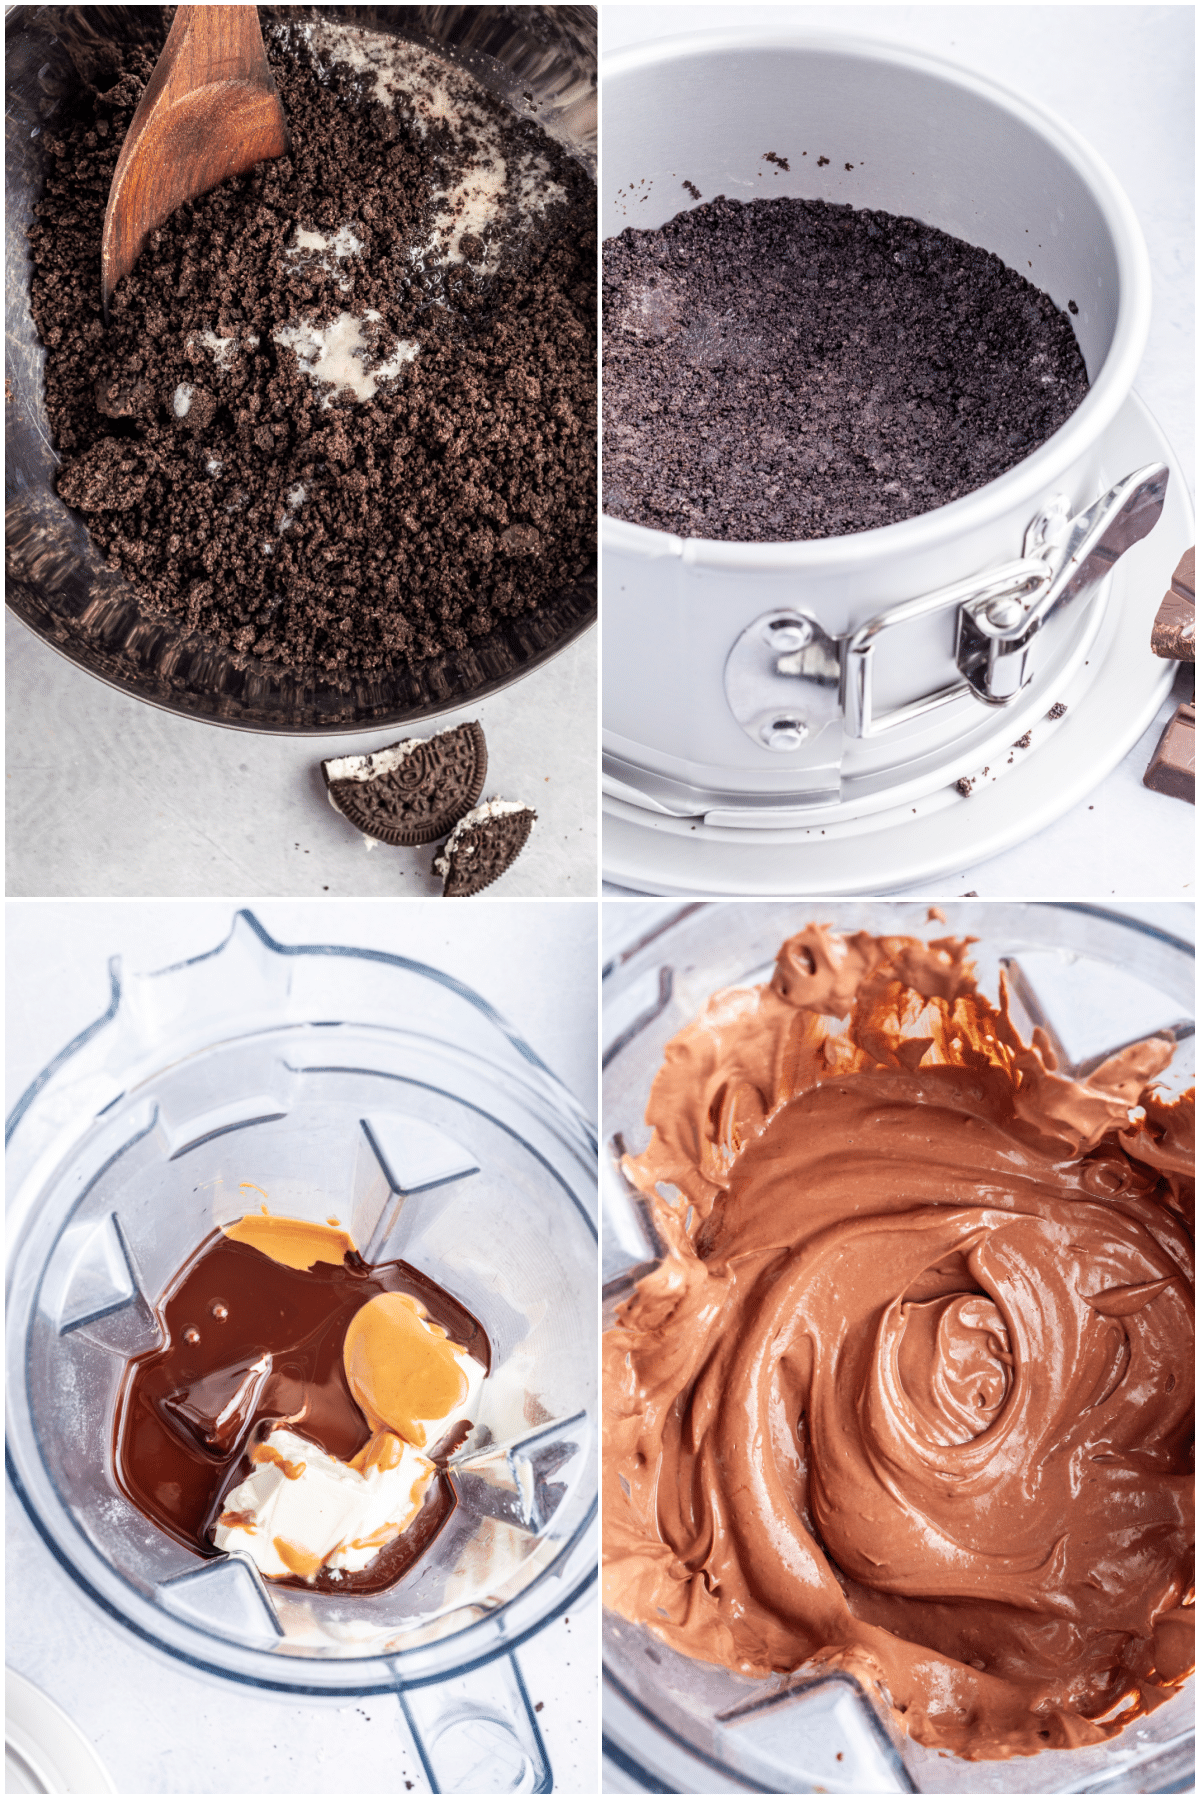 A four image collage shows how to make an Oreo Peanut Butter Pie: combine melted butter with crushed Oreo cookies, press cookie mixture into springform pan, blend melted chocolate, peanut butter, and silken tofu until smooth, add to top of Oreo crust.